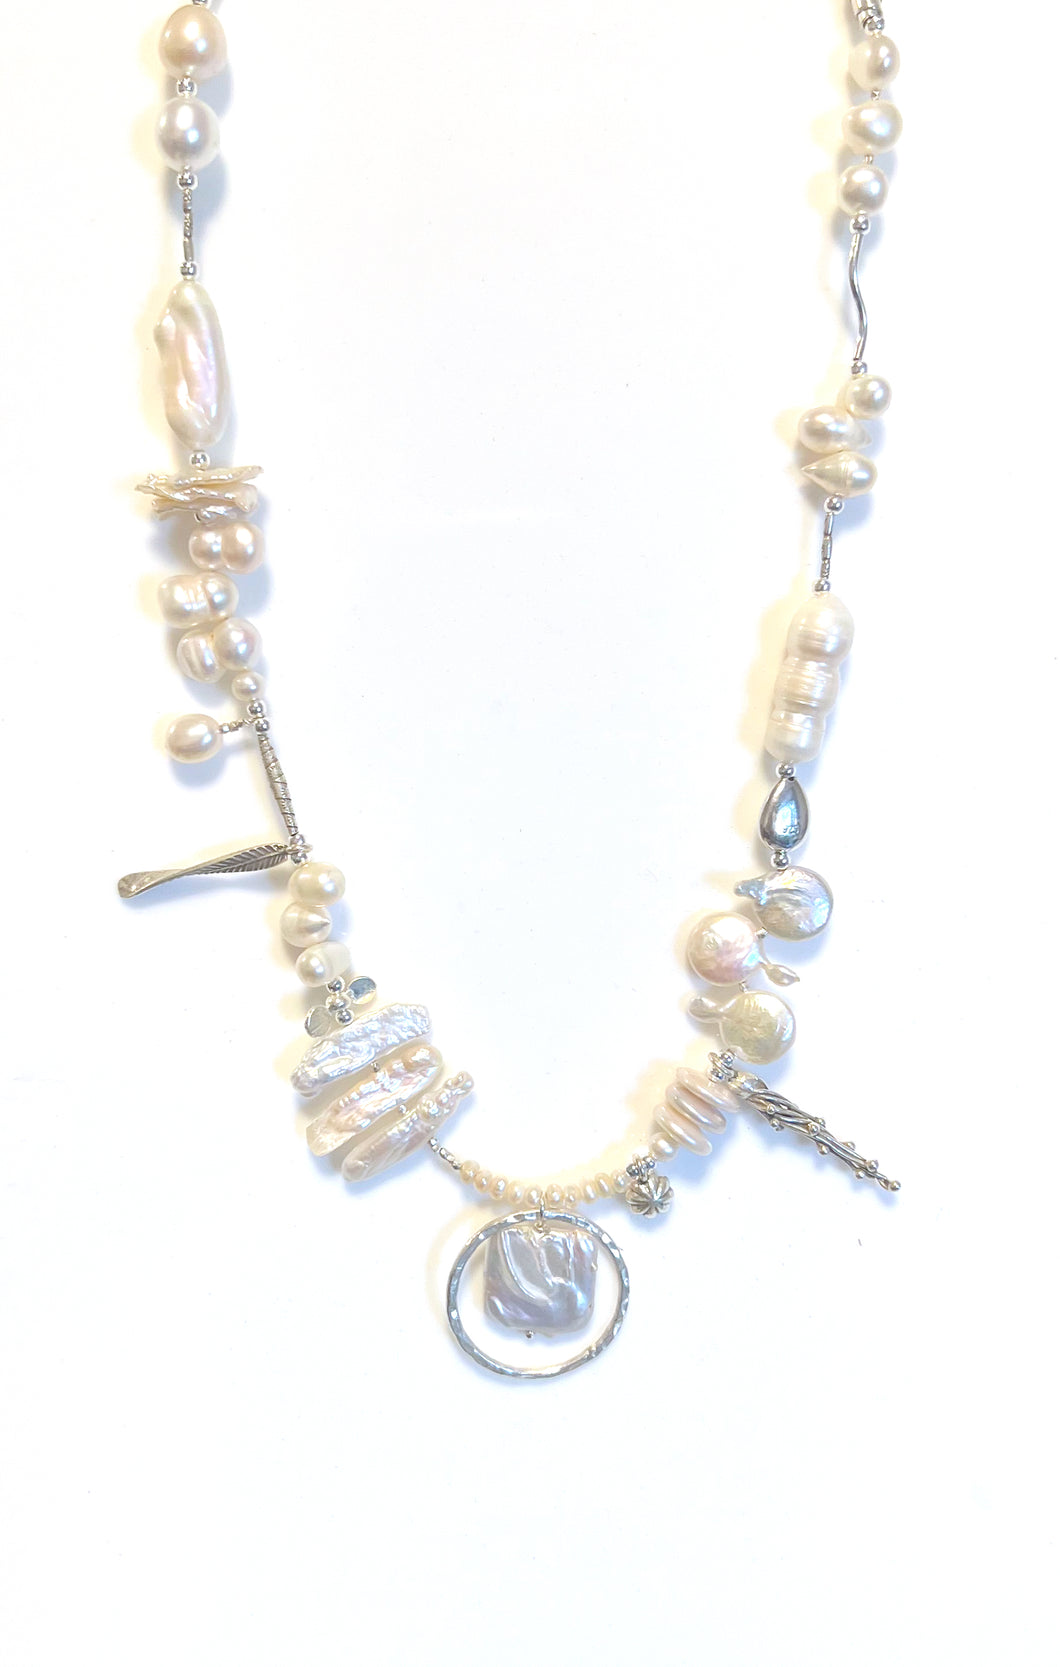 Australian Handmade Pearl Necklace with Various Shape Pearls and Sterling Silver